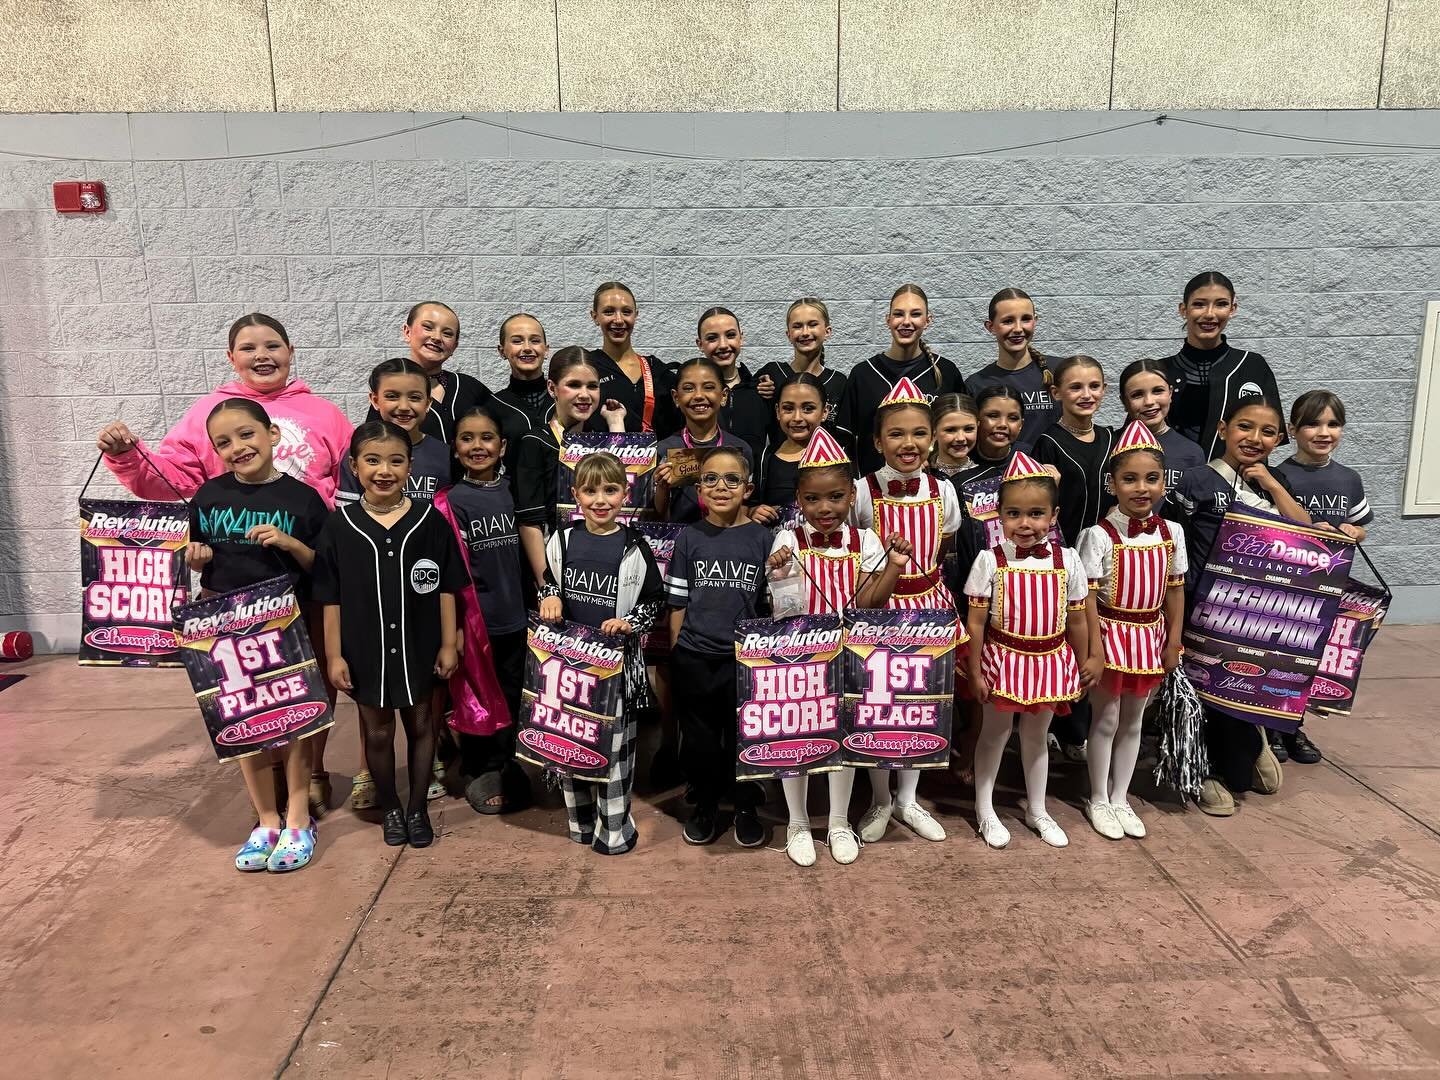 Proud is an understatement! RDC went to @revotalent and made us proud!! We had so many 1st place in categories, high point routines, and multiple overall placements! Keep up the amazing work dancers! NATIONALS IS APPROACHING!